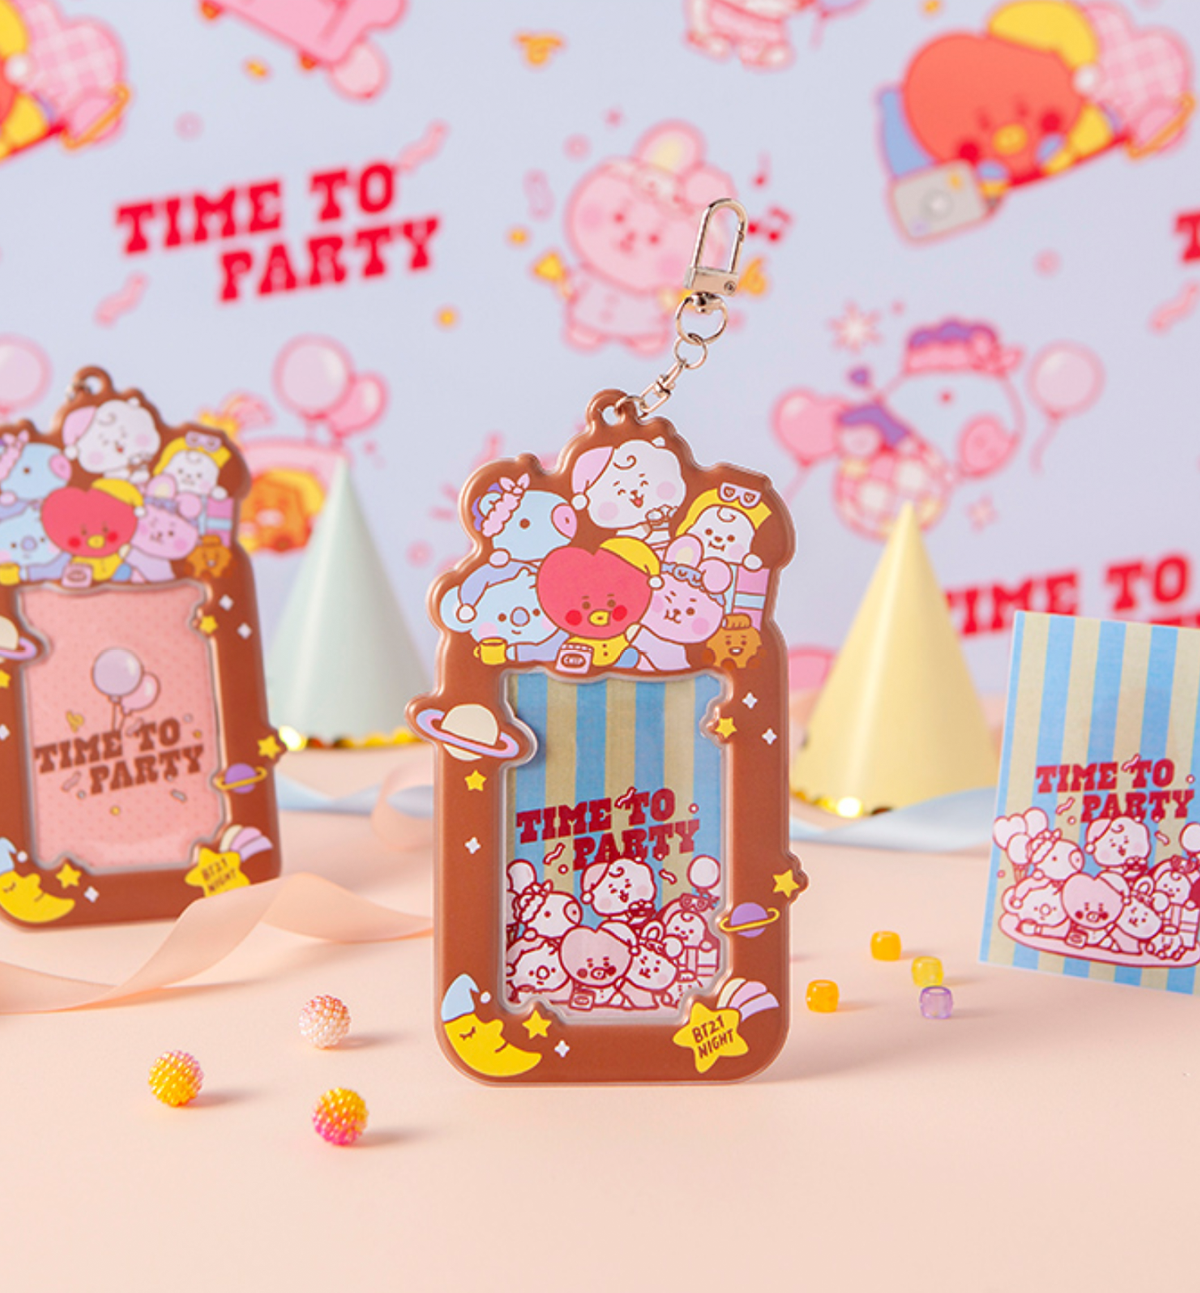 BT21 Photo Holder Keyring [Time To Party]